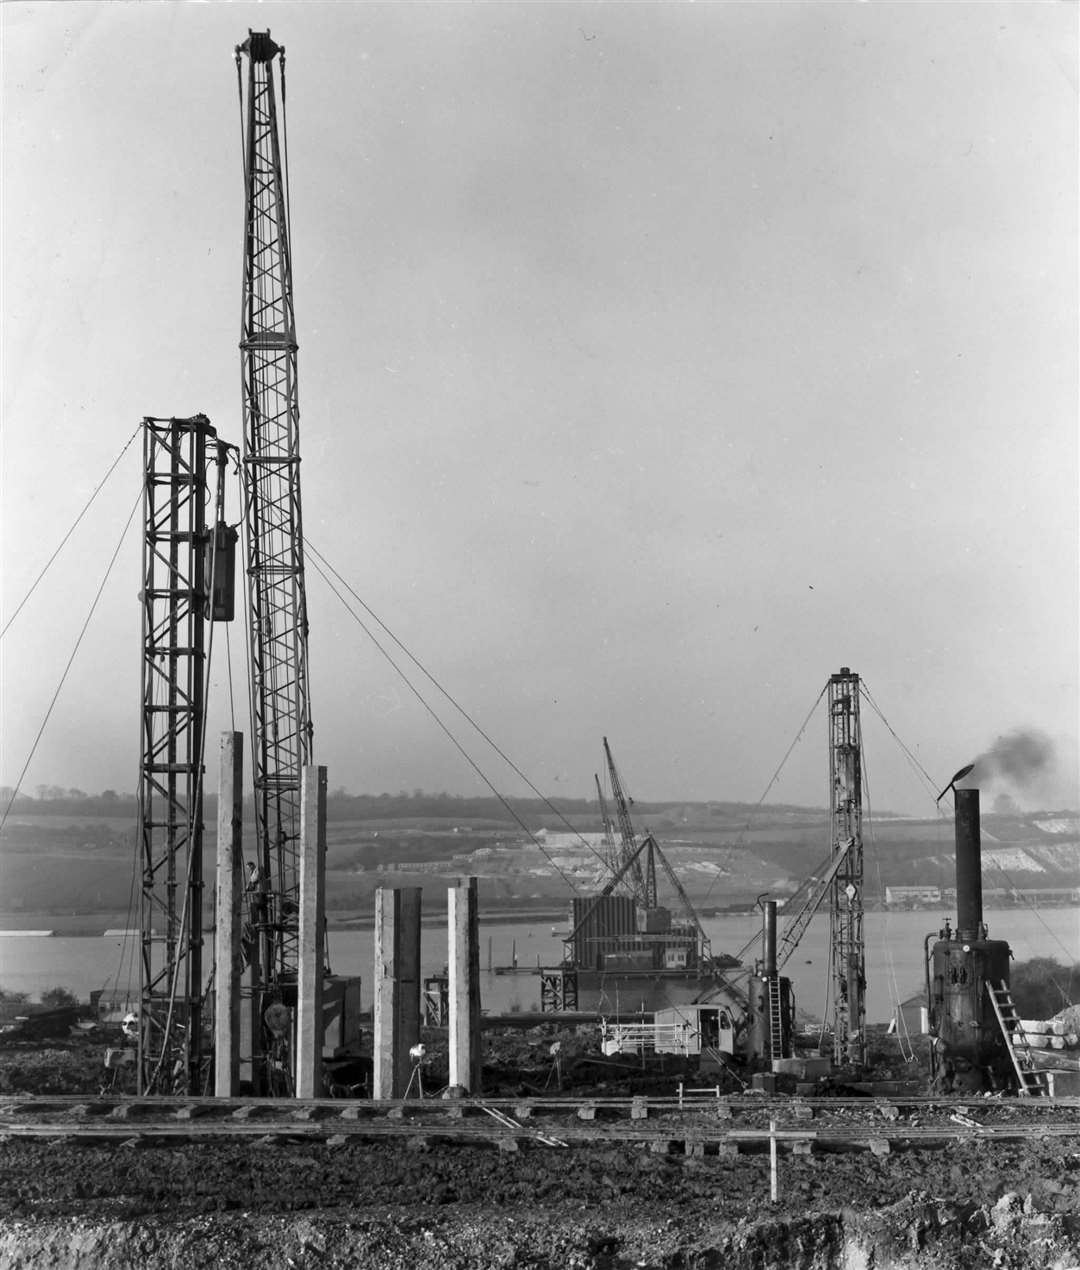 The construction works at the new Medway Bridge in 1961